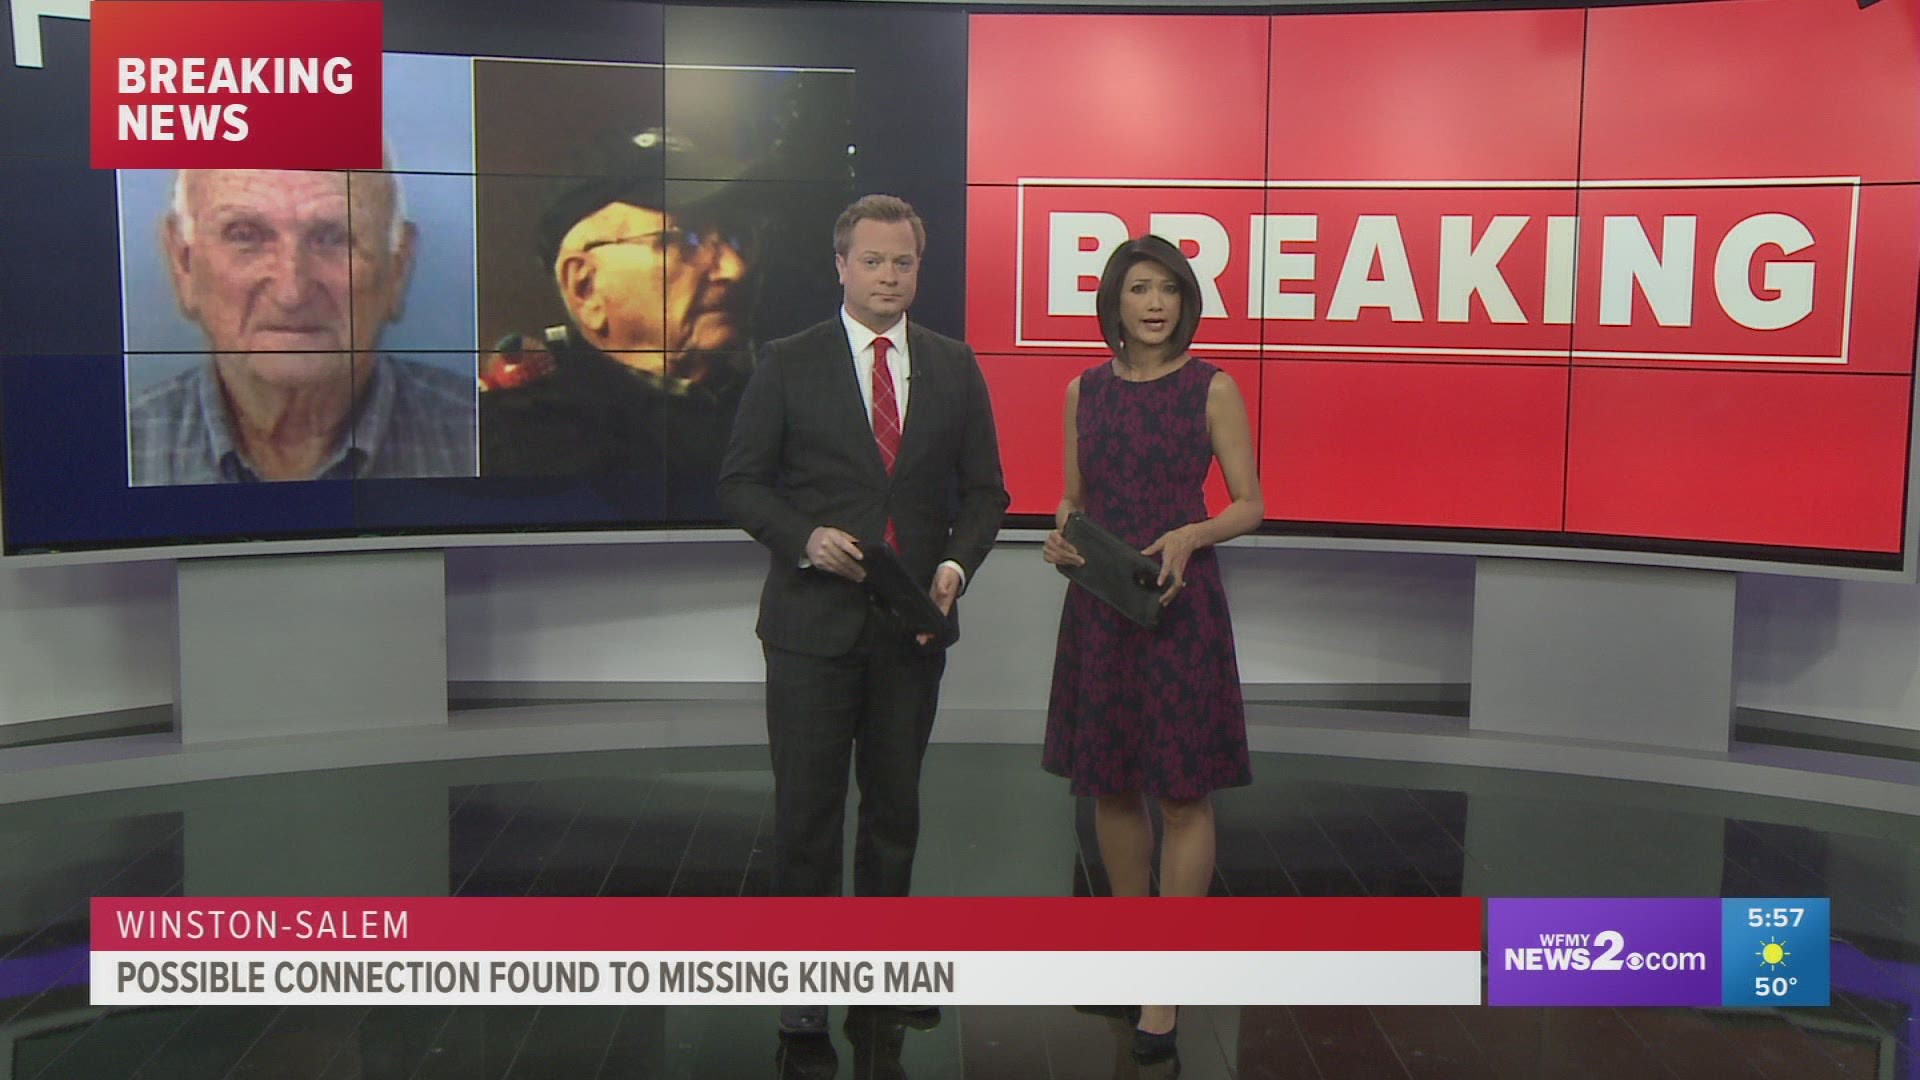 Police are giving an update into the missing king man, after finding a car that could be connected to the case.